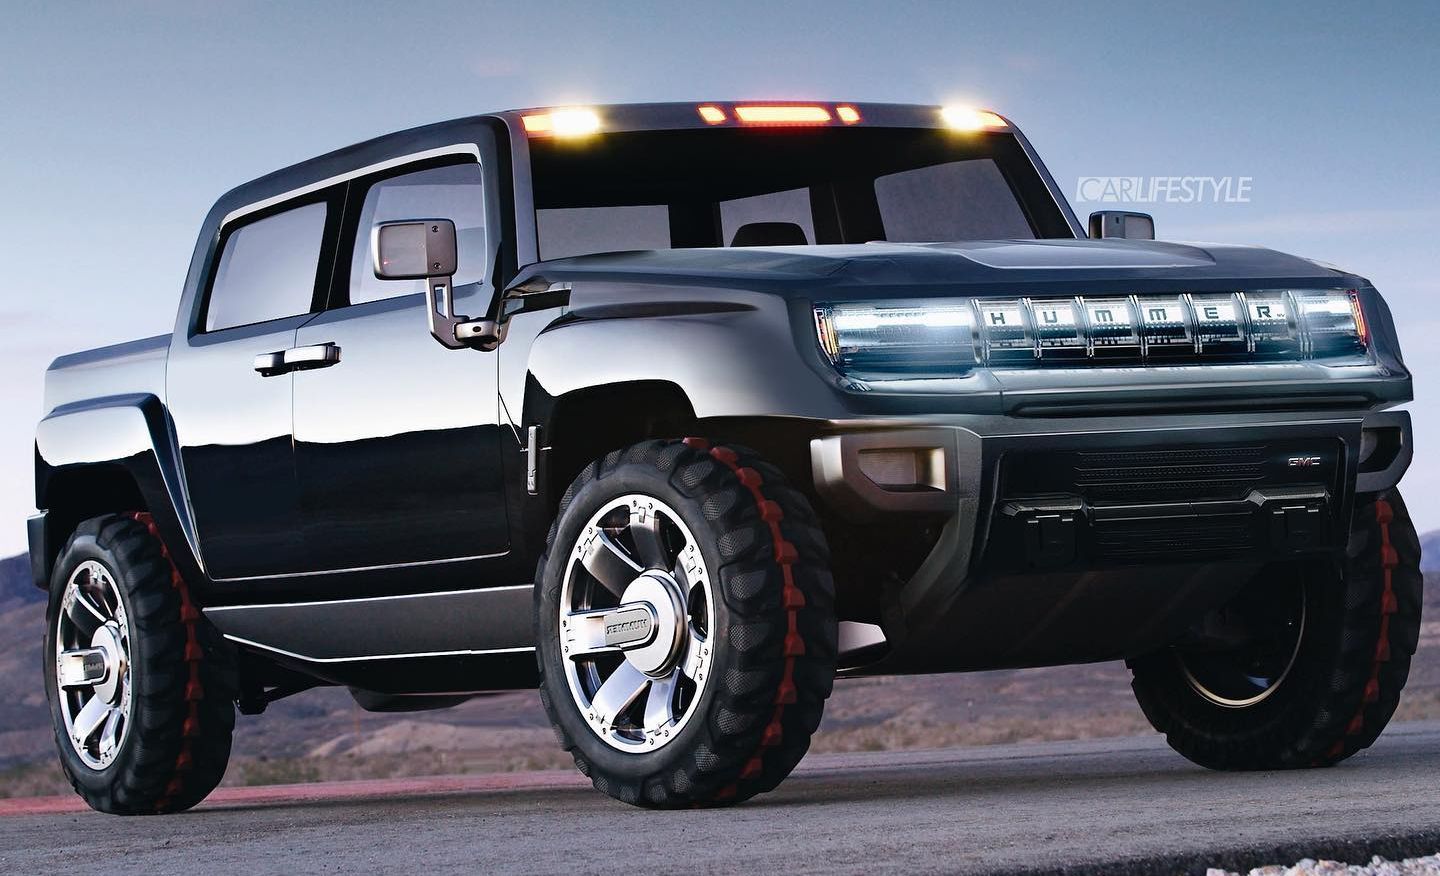 New 2021 GMC Hummer EV Rendering Looks Just About Right Top Speed. Hummer truck, Electric pickup truck, Pickup trucks